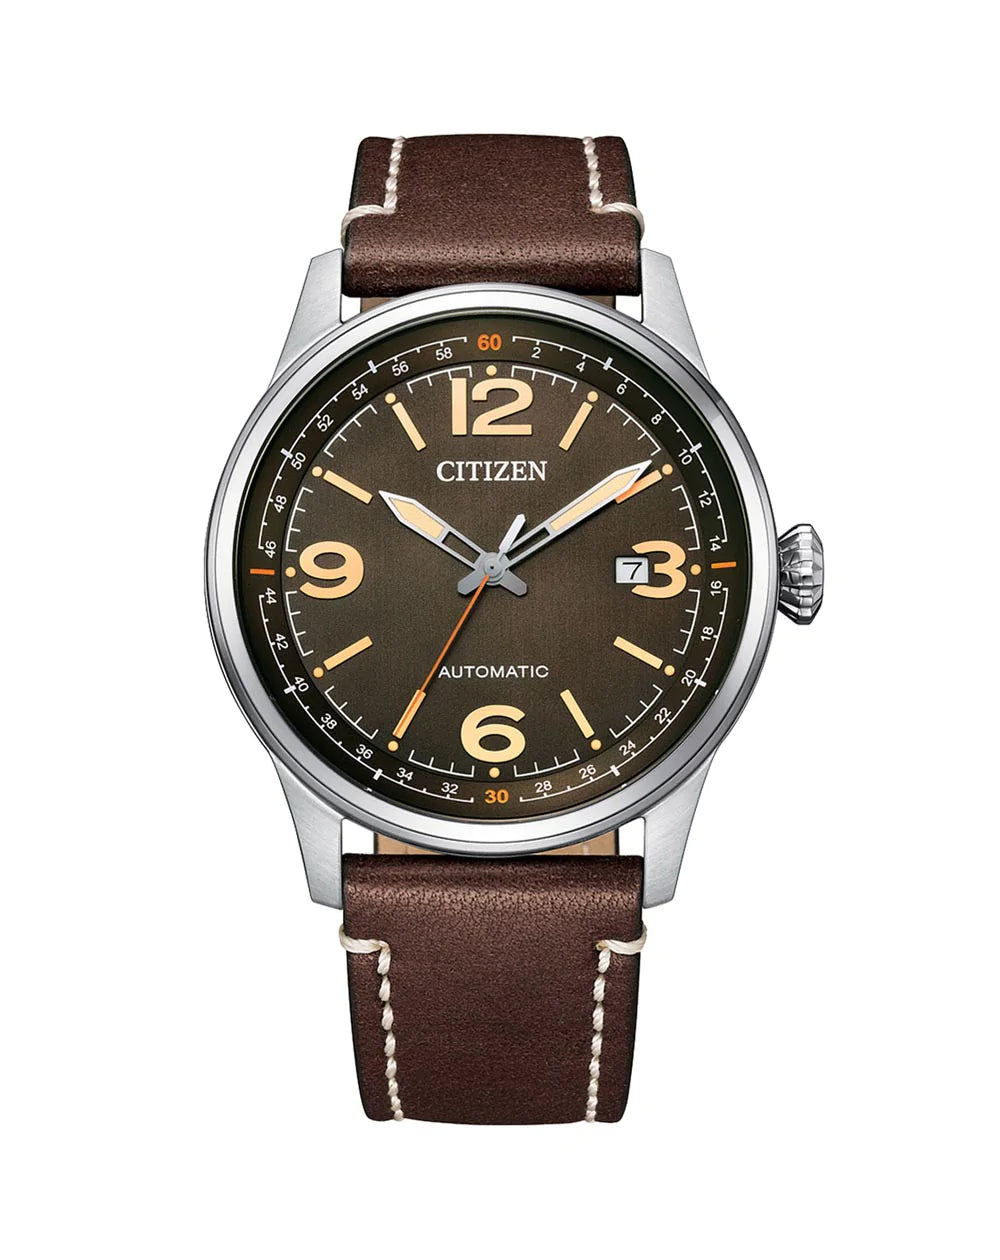 Gent's Automatic Aviator Style Watch